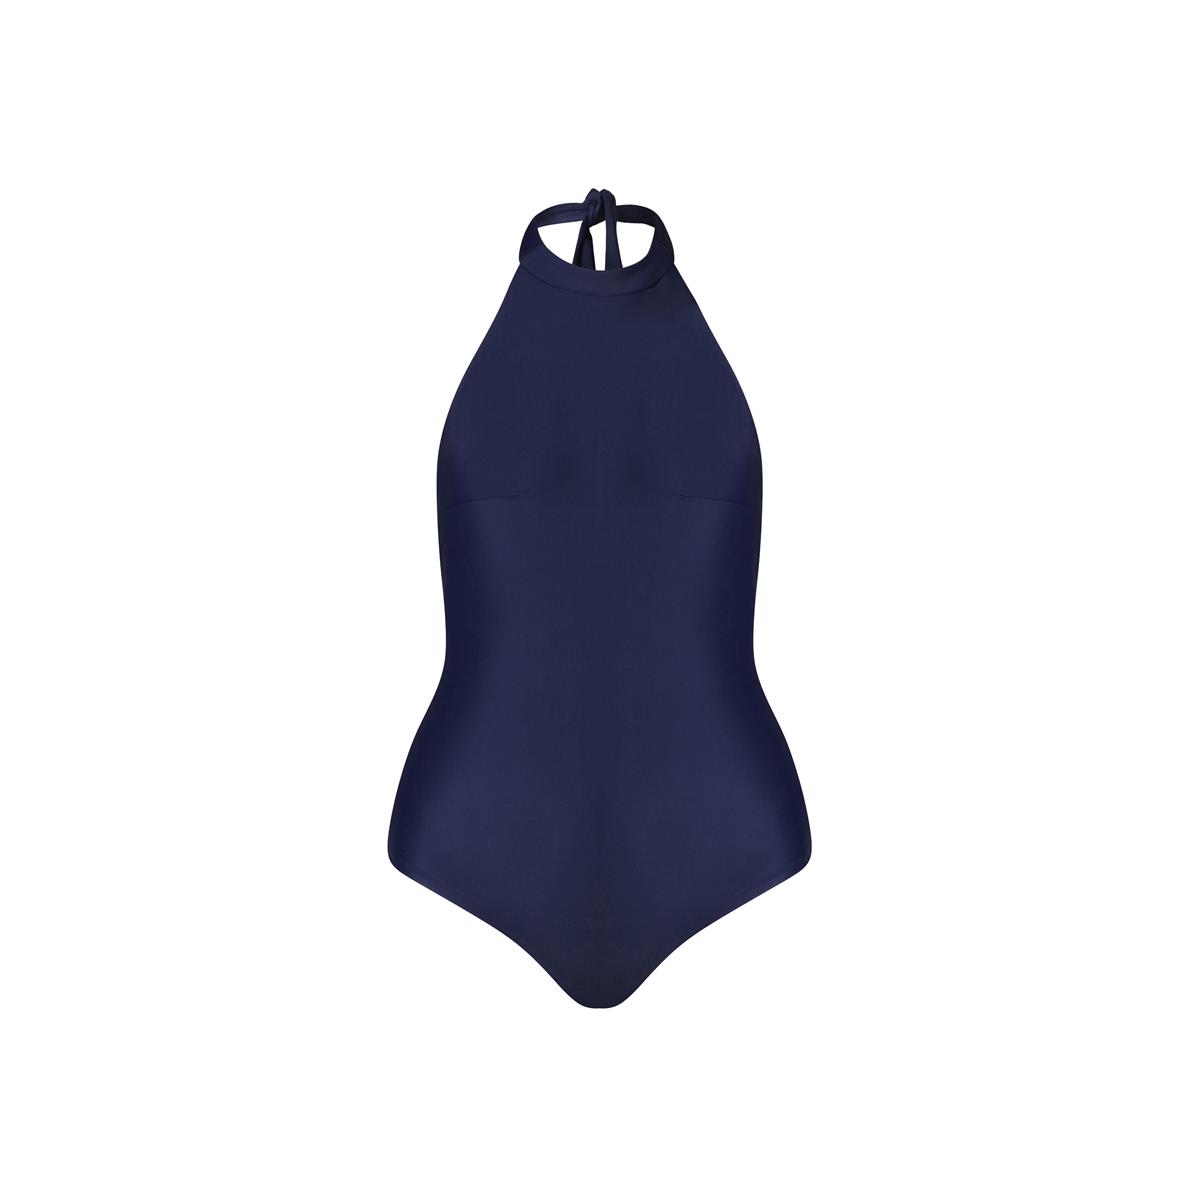 MARGARET AND HERMIONE_SS19_Swimsuit No.4_night_EUR 157,00